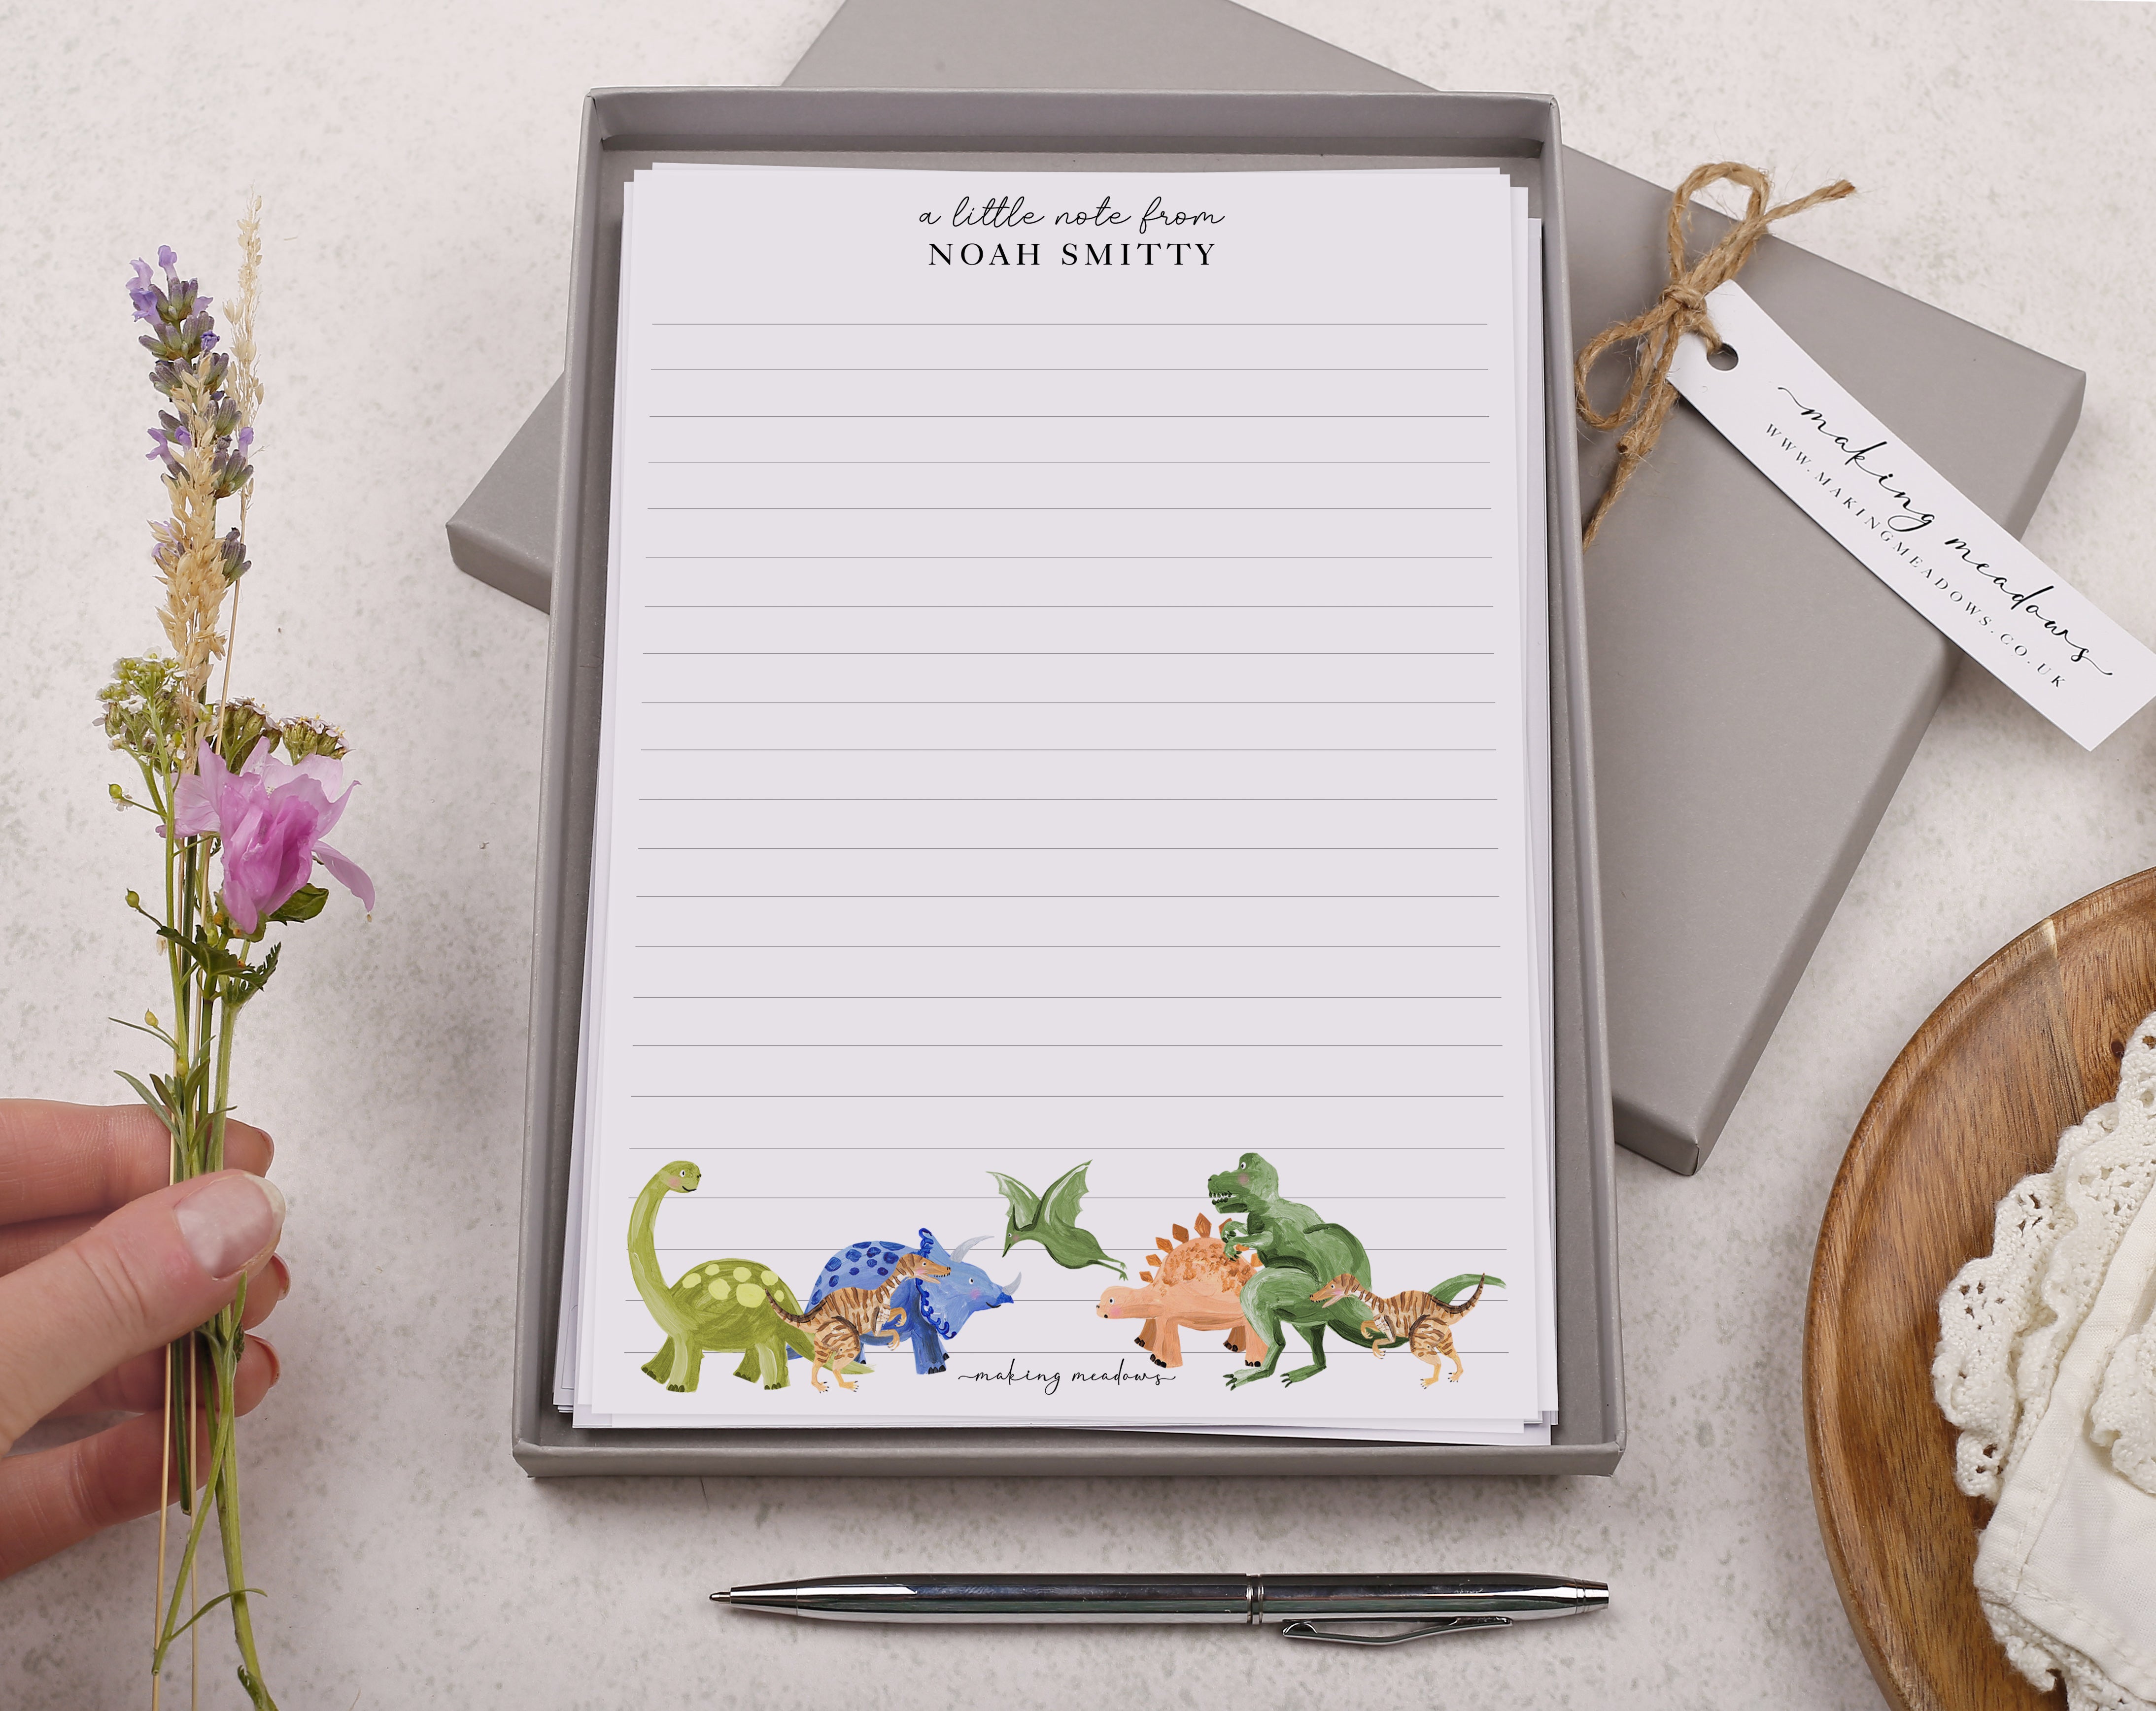 Premium personalised A5 letter writing paper set for children with a cute prehistoric dinosaur design. 